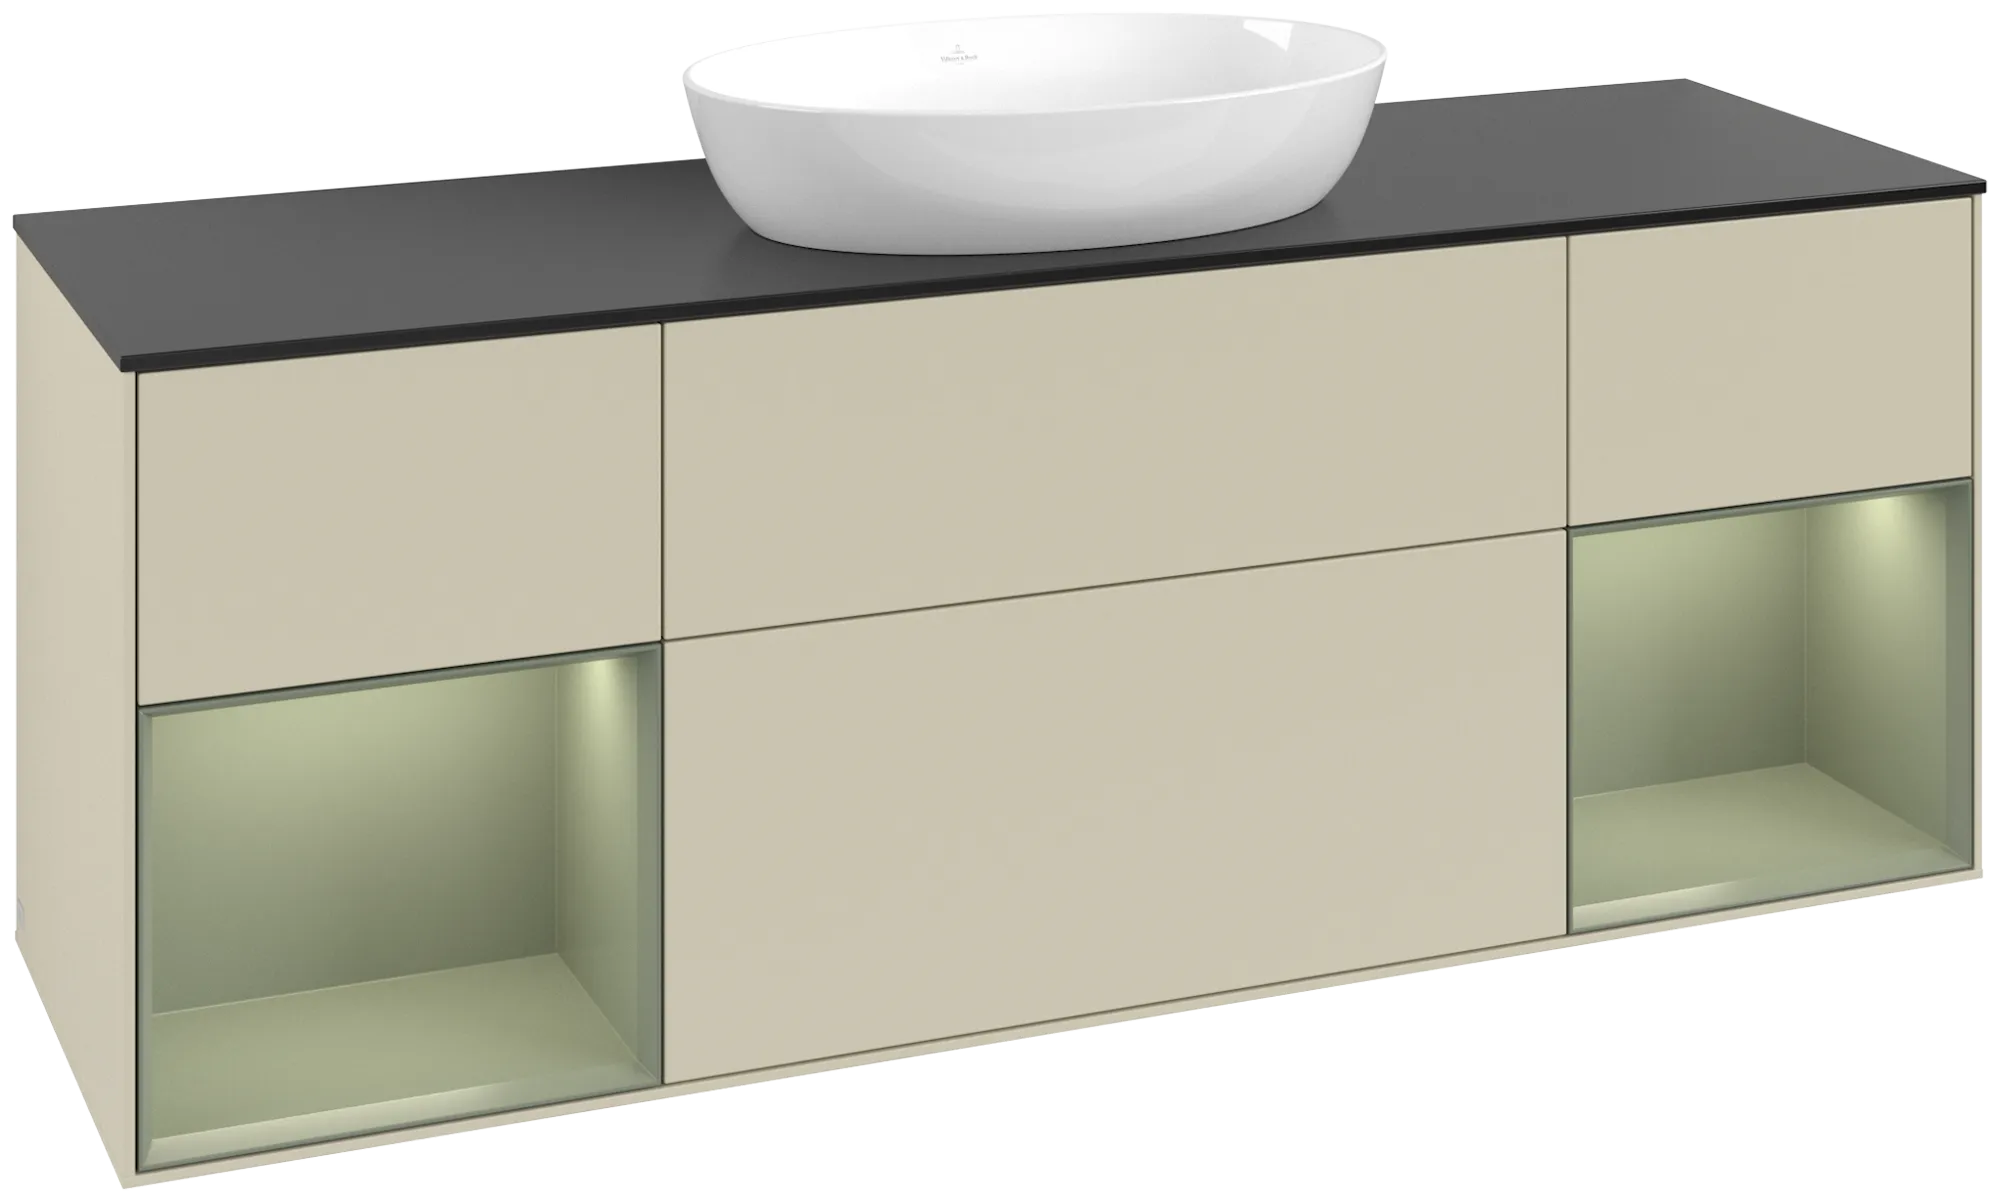 Picture of VILLEROY BOCH Finion Vanity unit, with lighting, 4 pull-out compartments, 1600 x 603 x 501 mm, Silk Grey Matt Lacquer / Olive Matt Lacquer / Glass Black Matt #GD02GMHJ